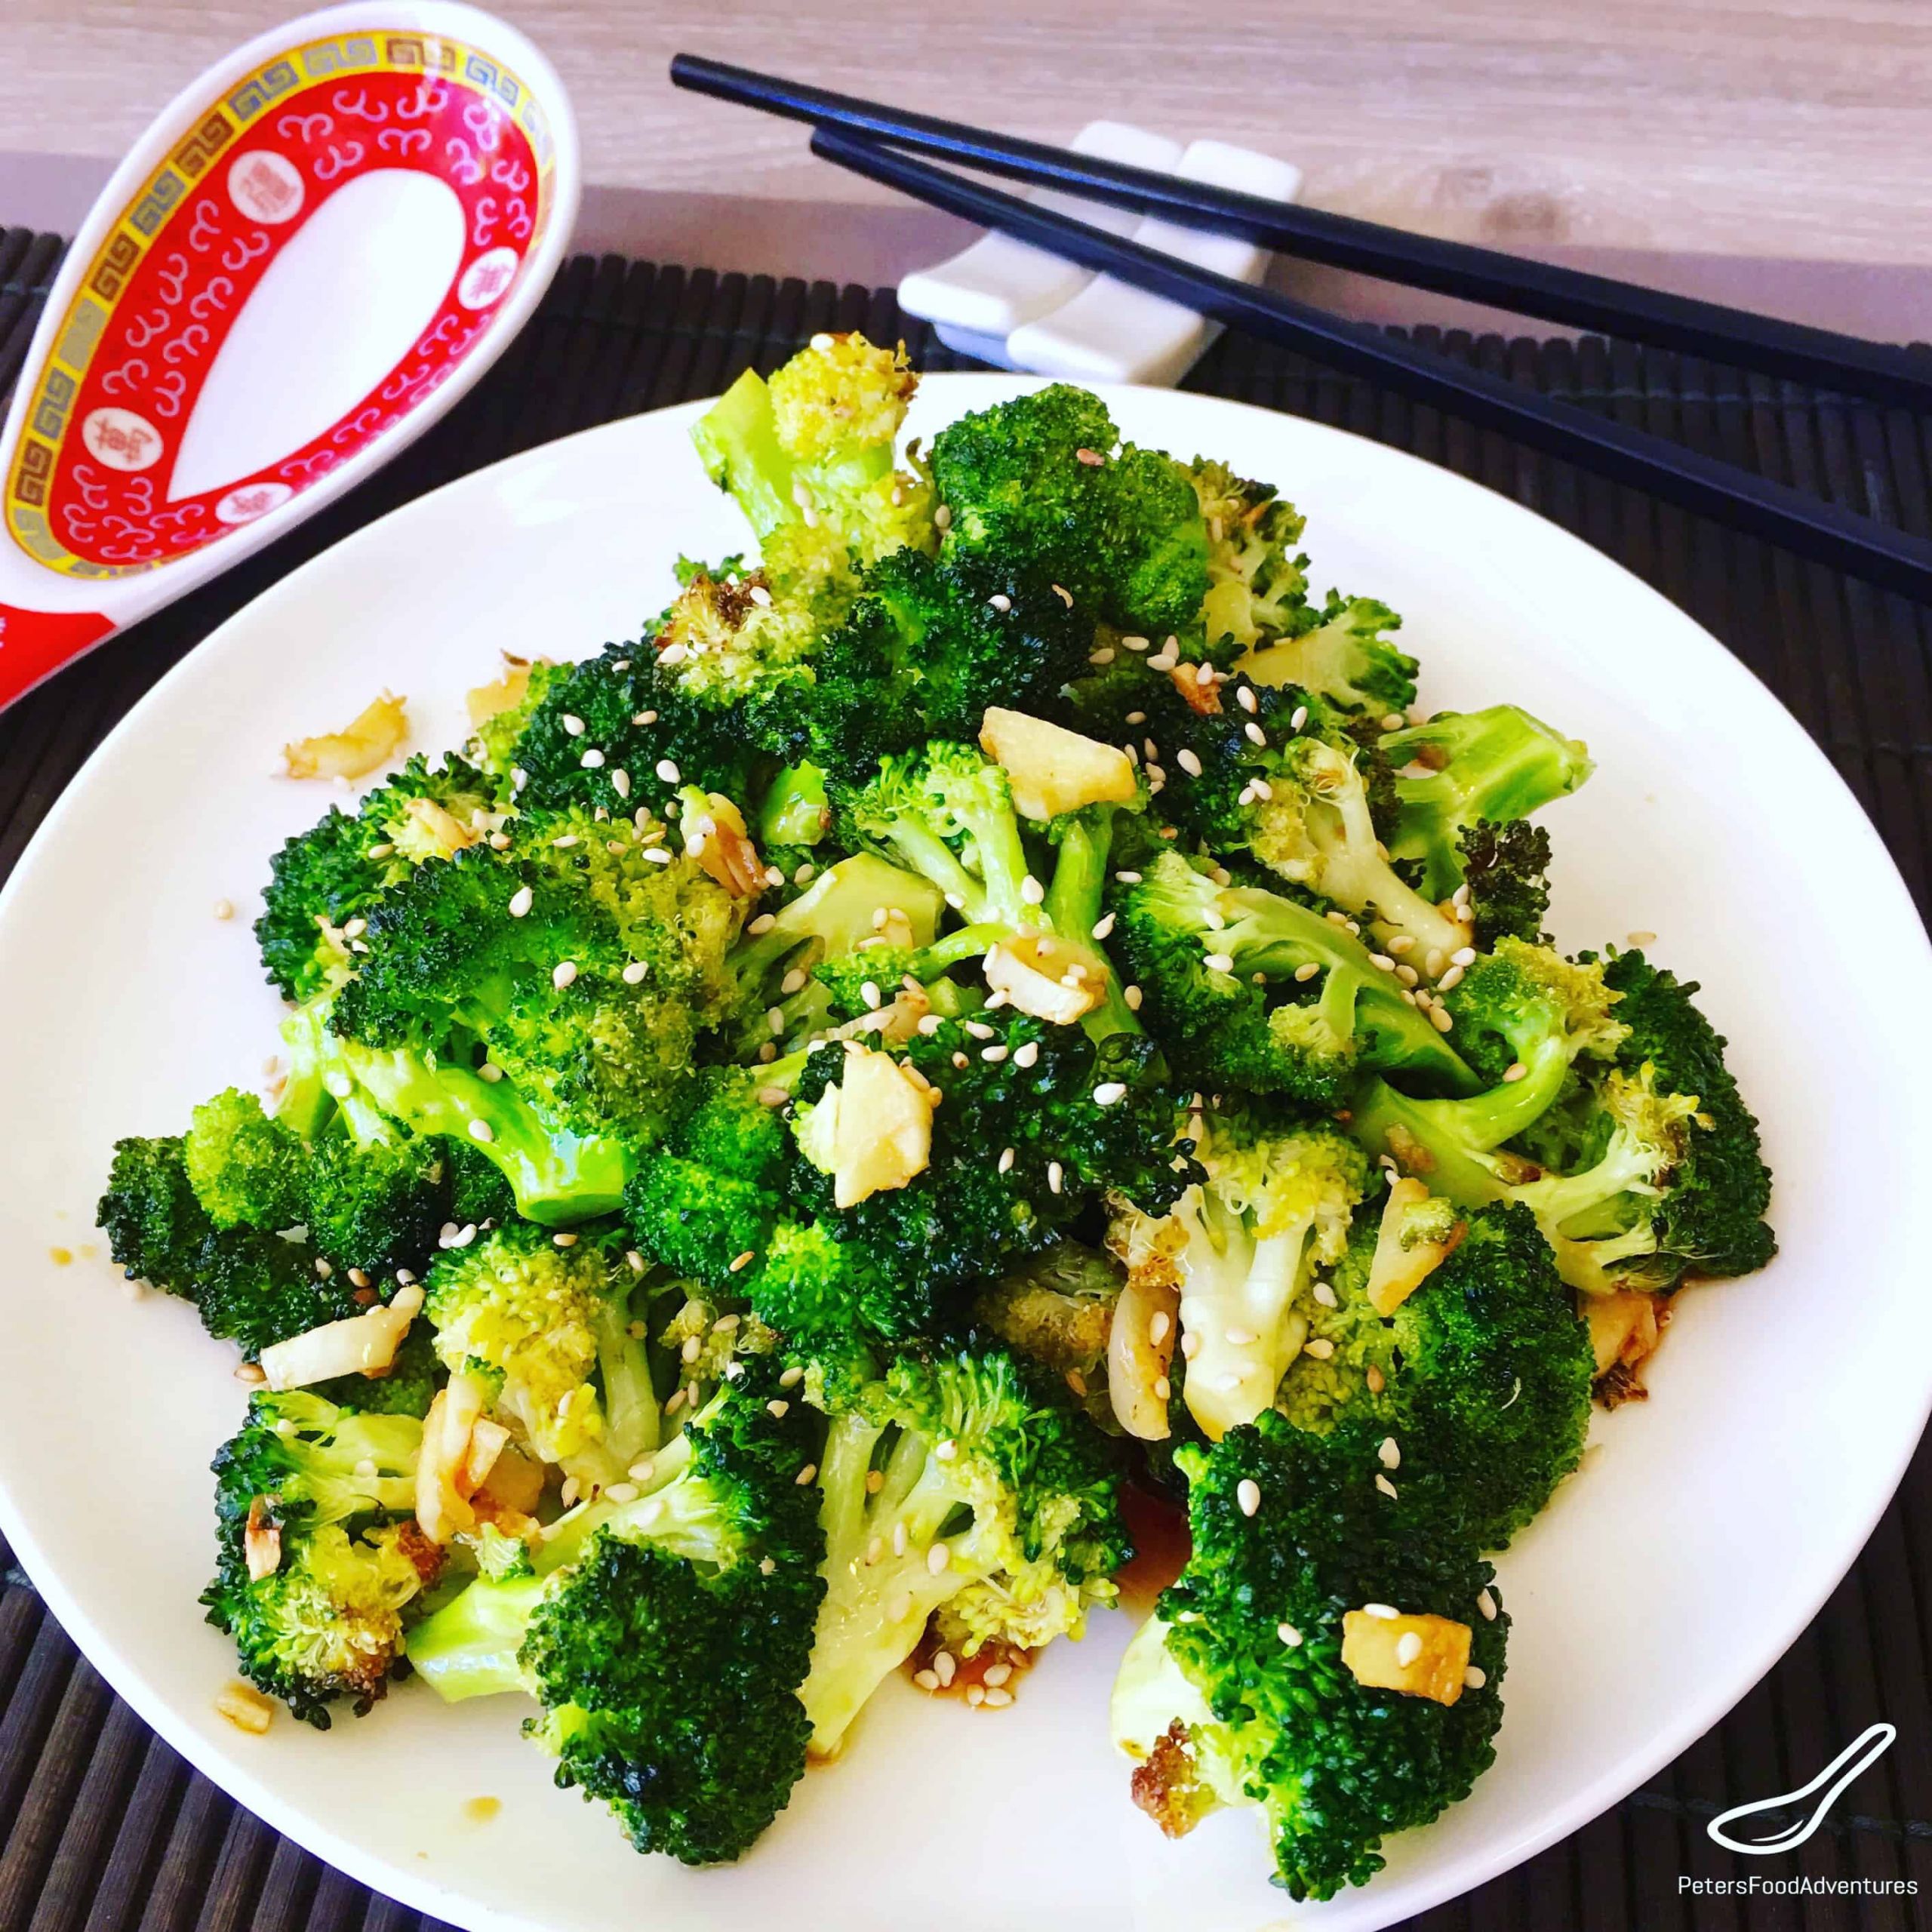 Broccoli With Garlic Sauce
 Roasted Broccoli with Garlic and Soy Sauce Peter s Food